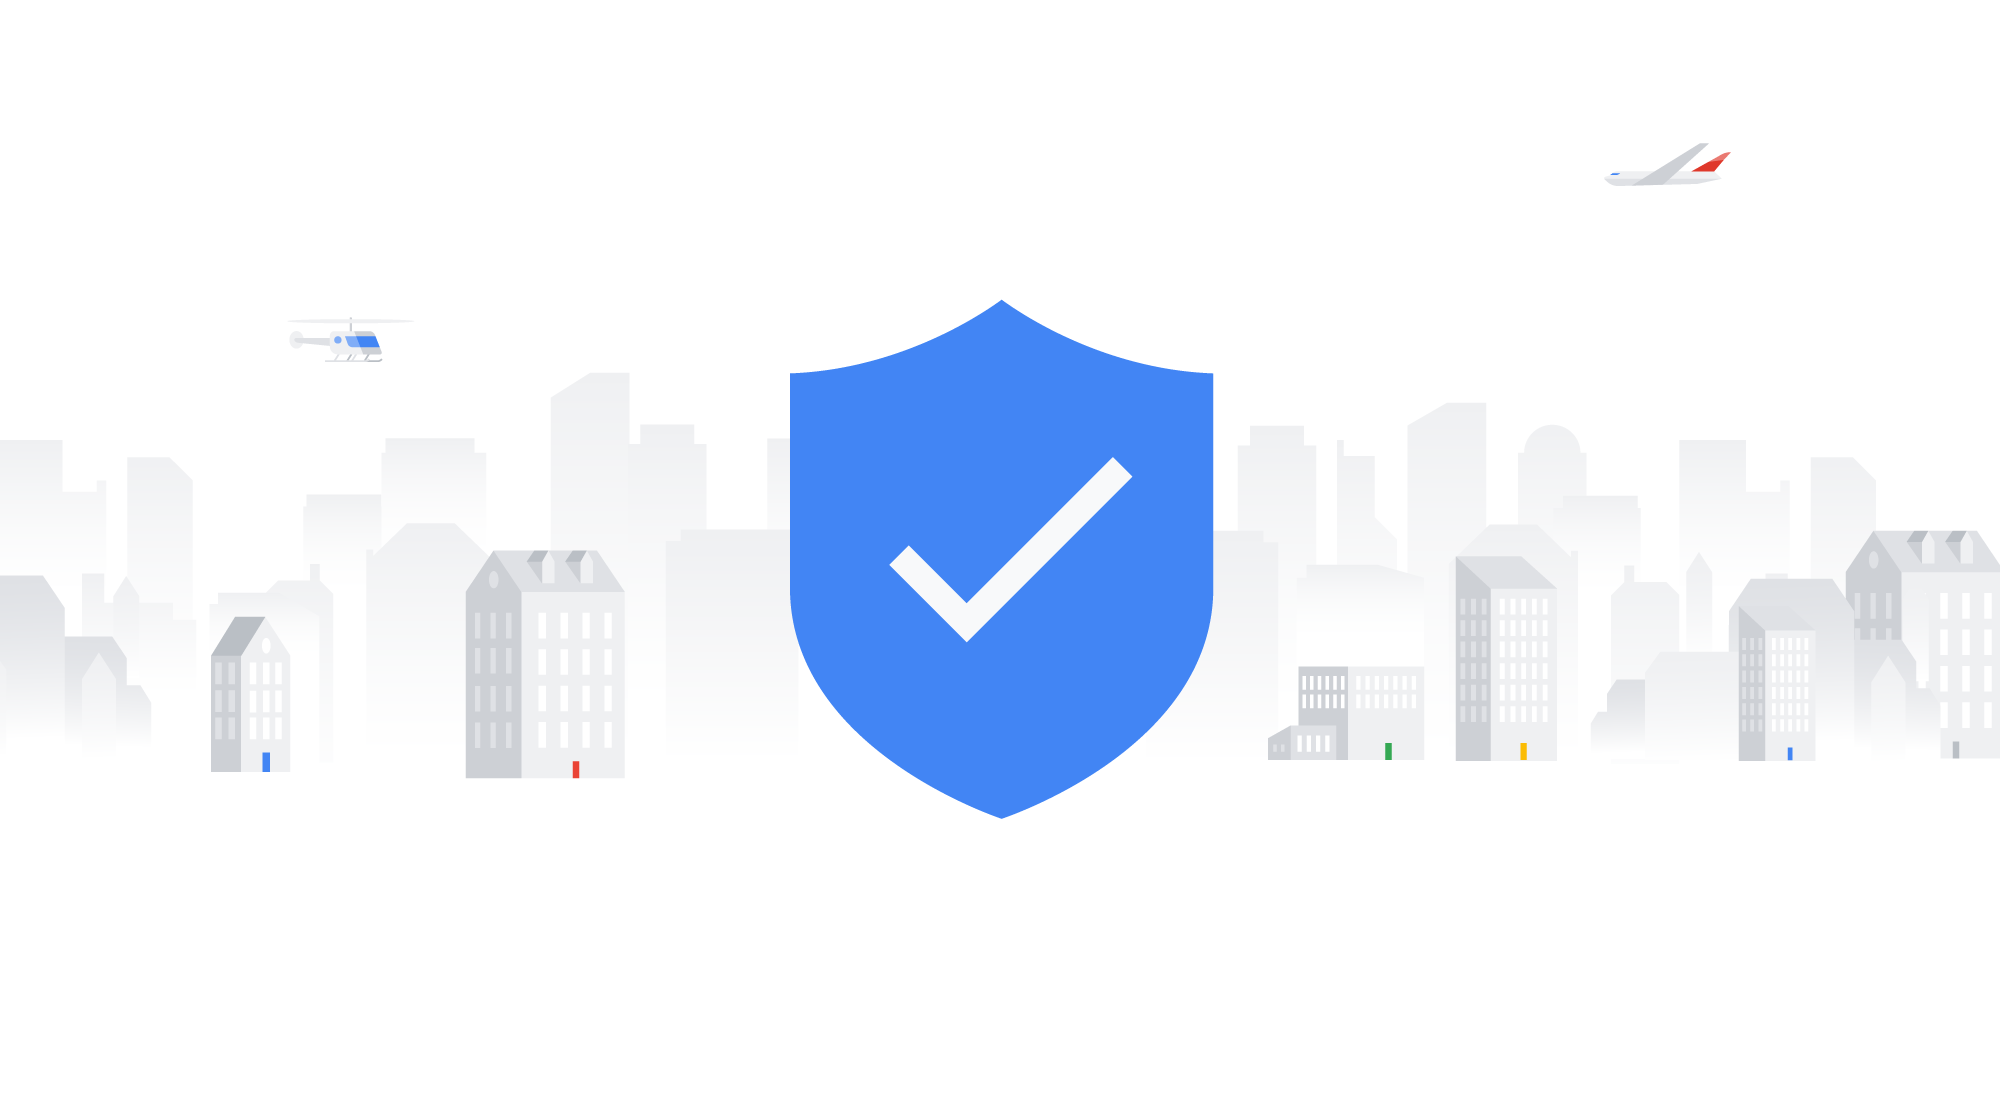 Getting started with Google Identity Platform